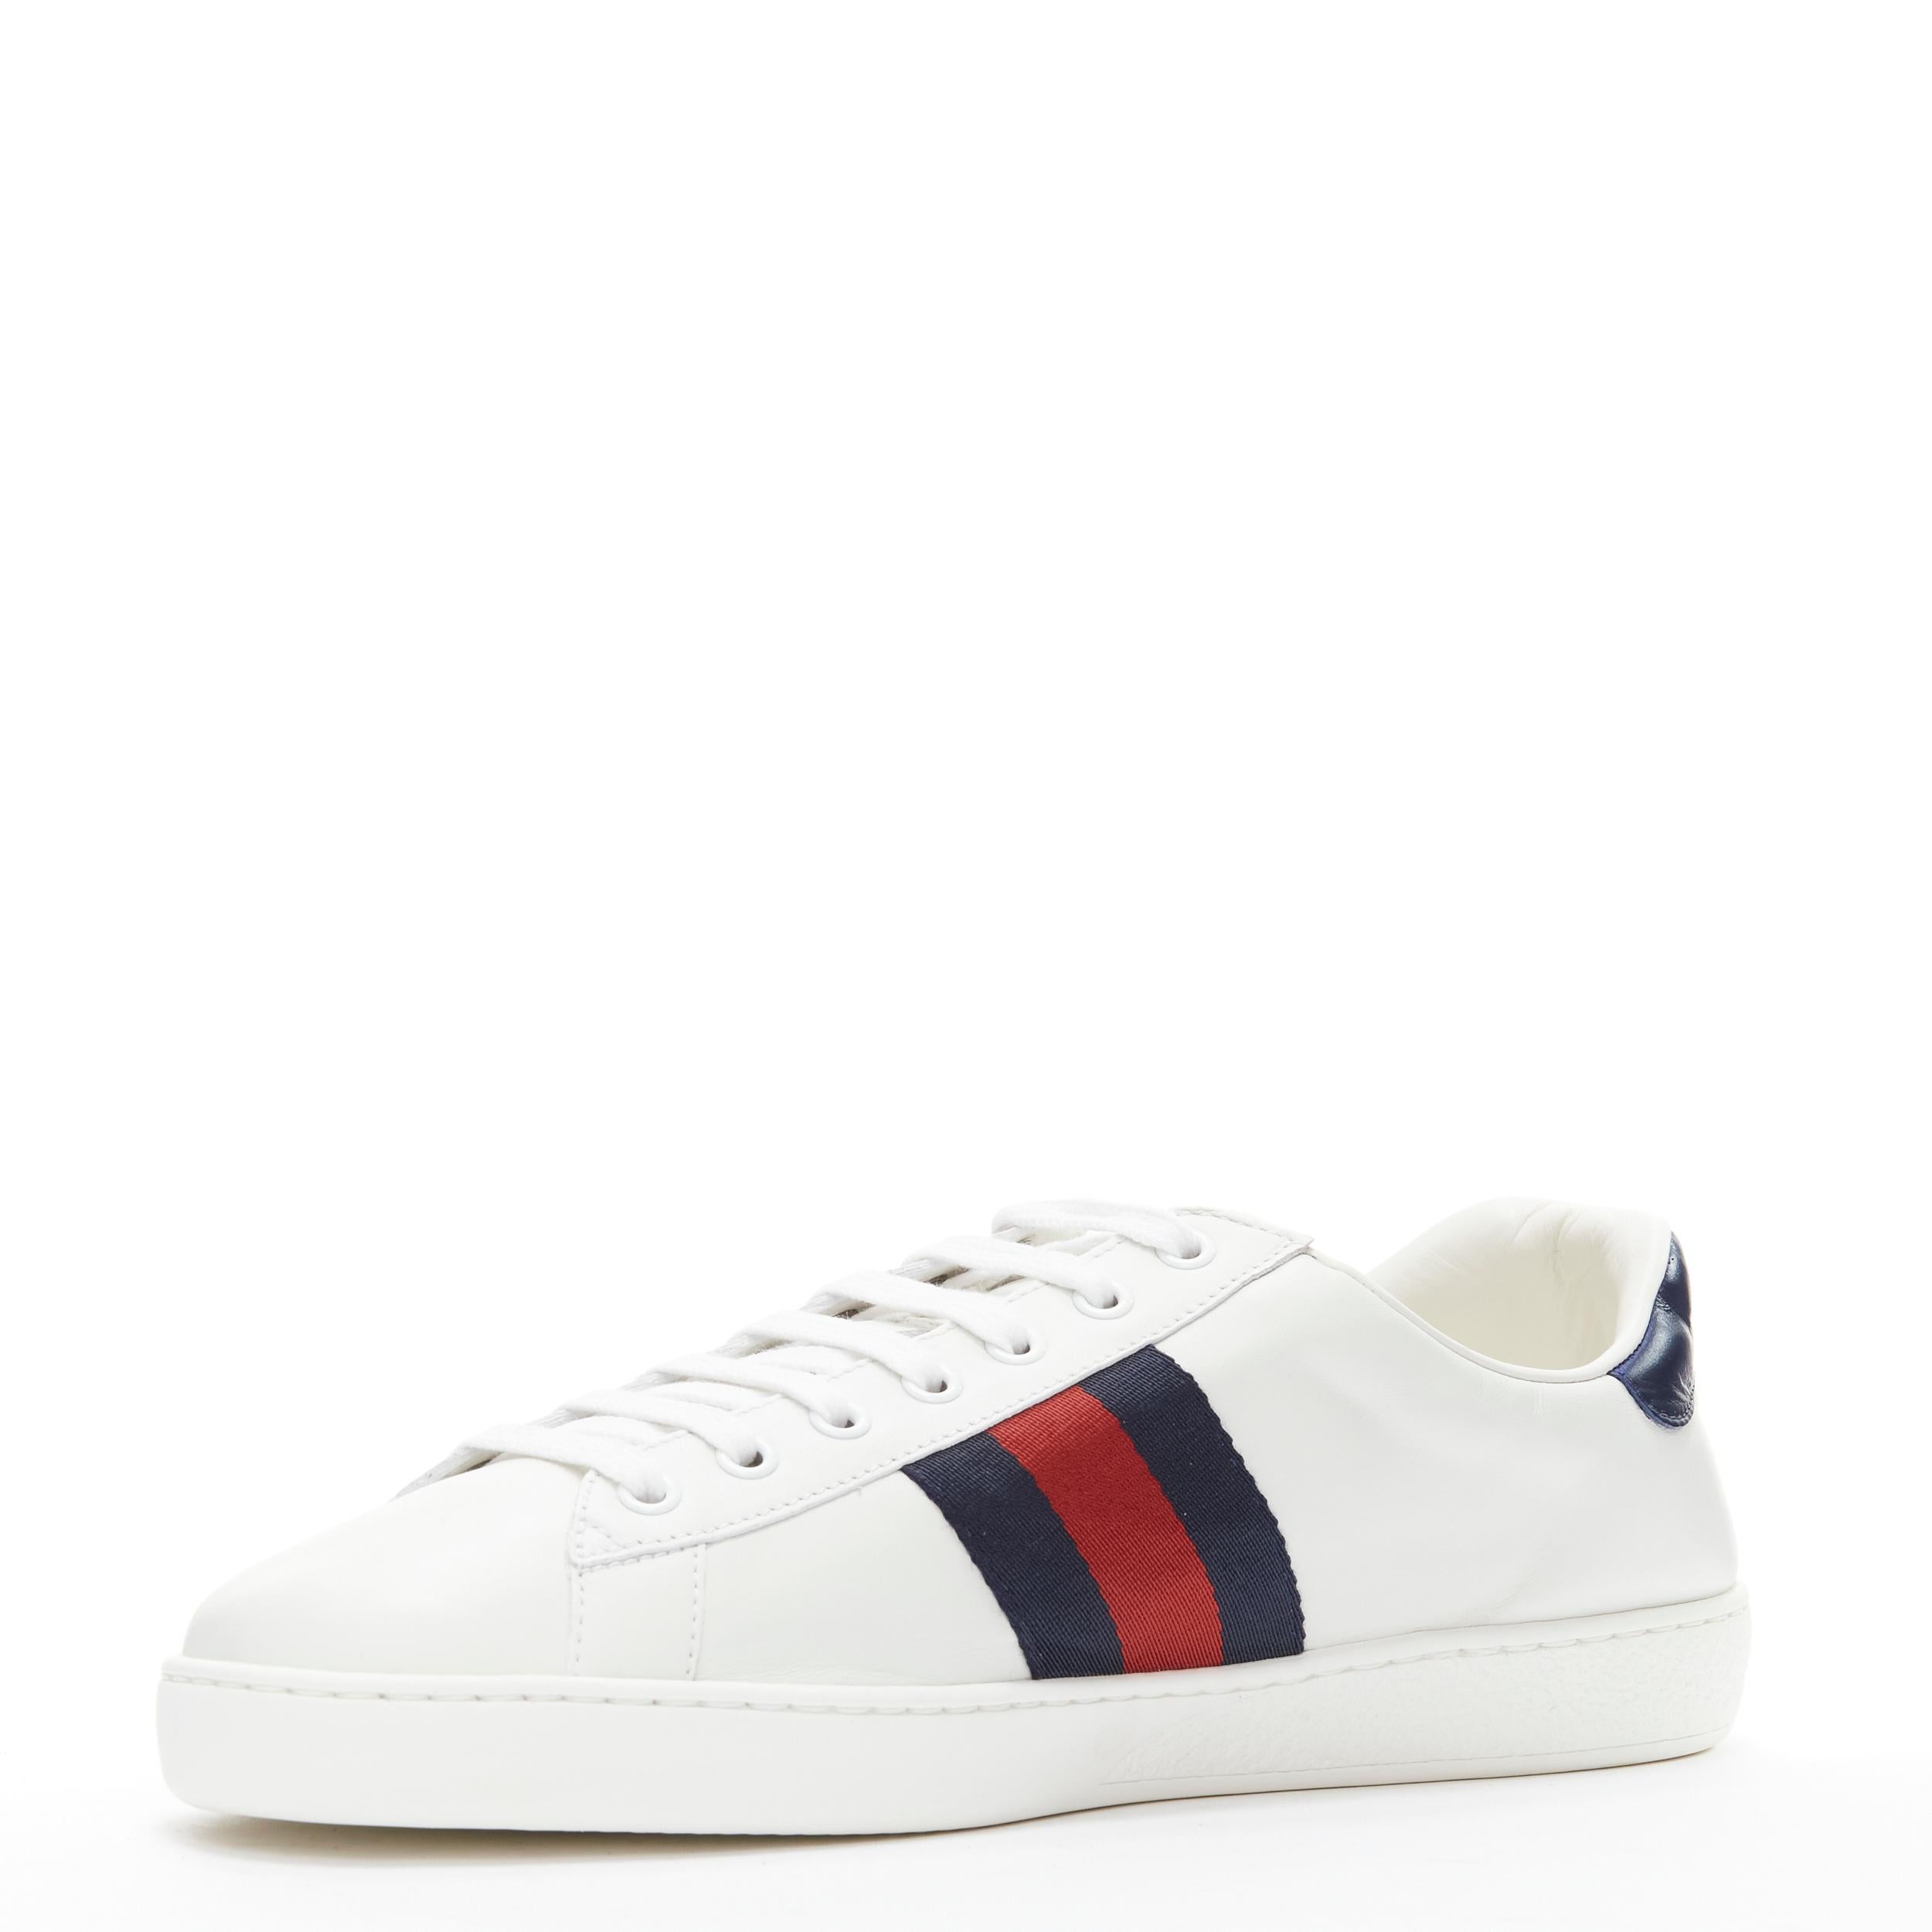 GUCCI Ace Loved gold letter patchwork white navy red web sneaker UK9 EU43 In Good Condition For Sale In Hong Kong, NT